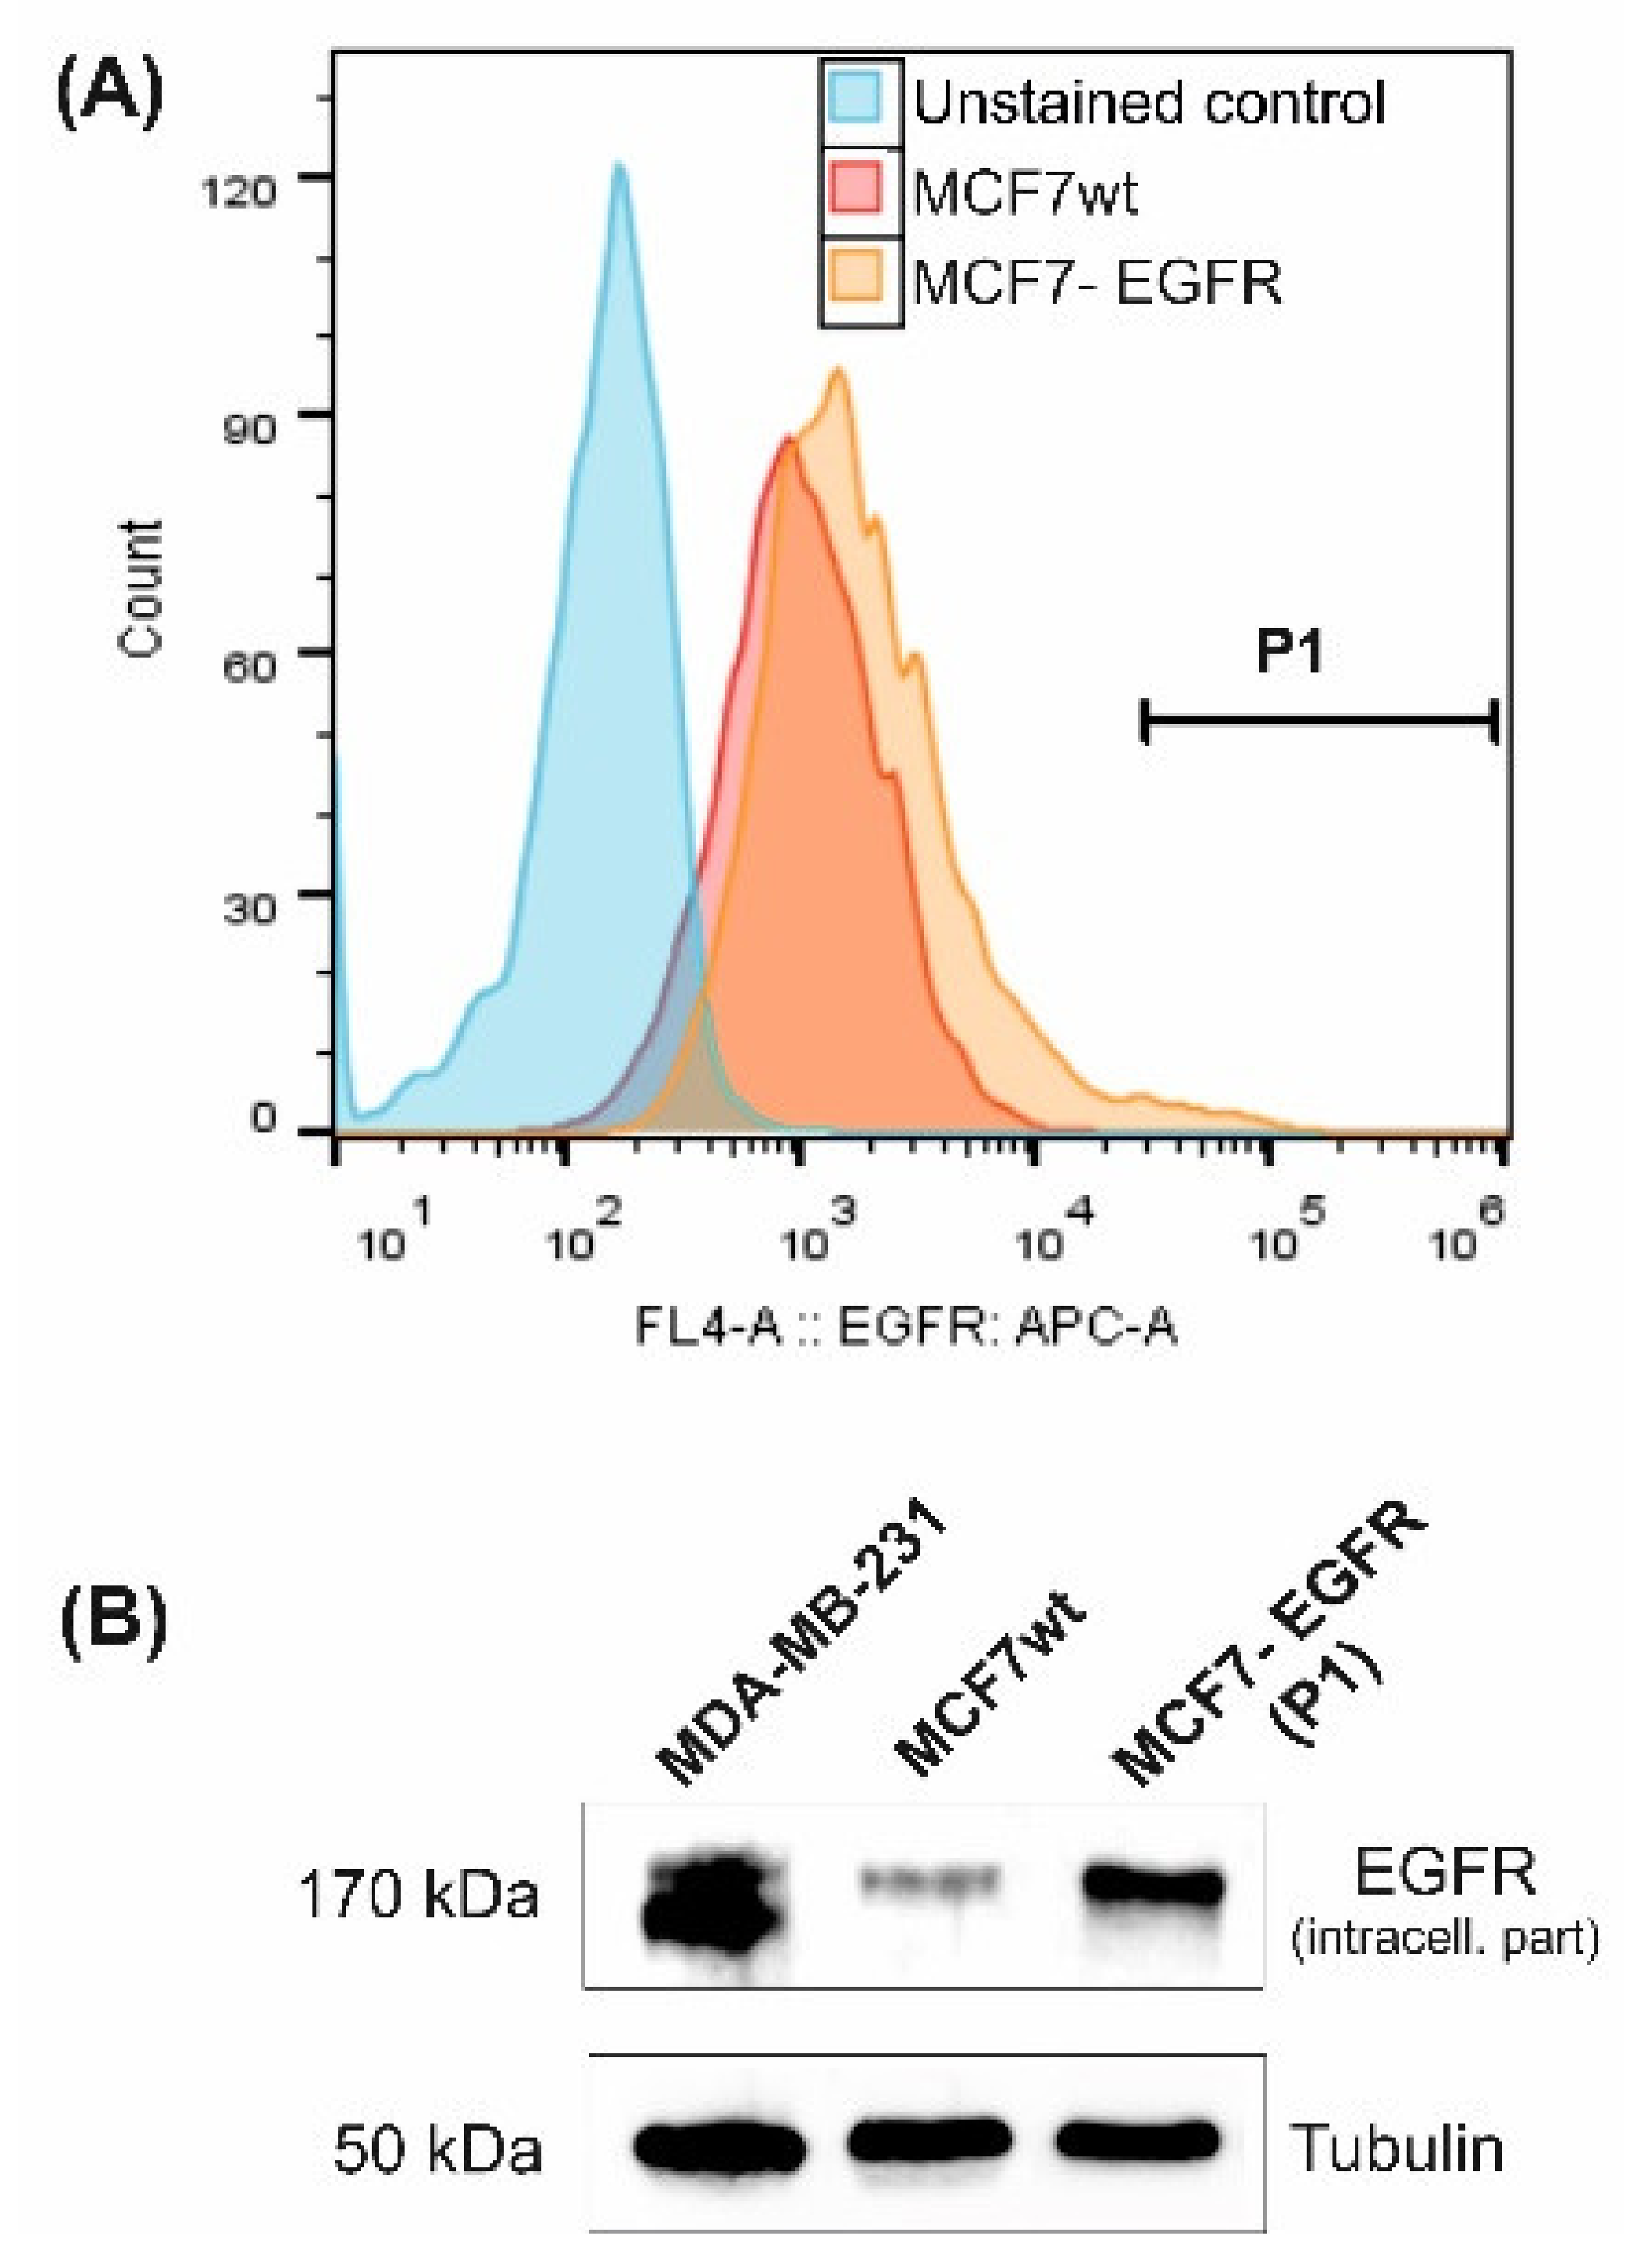 IJMS | Free Full-Text | EGFR Transgene Stimulates Spontaneous Formation of  MCF7 Breast Cancer Cells Spheroids with Partly Loss of HER3 Receptor